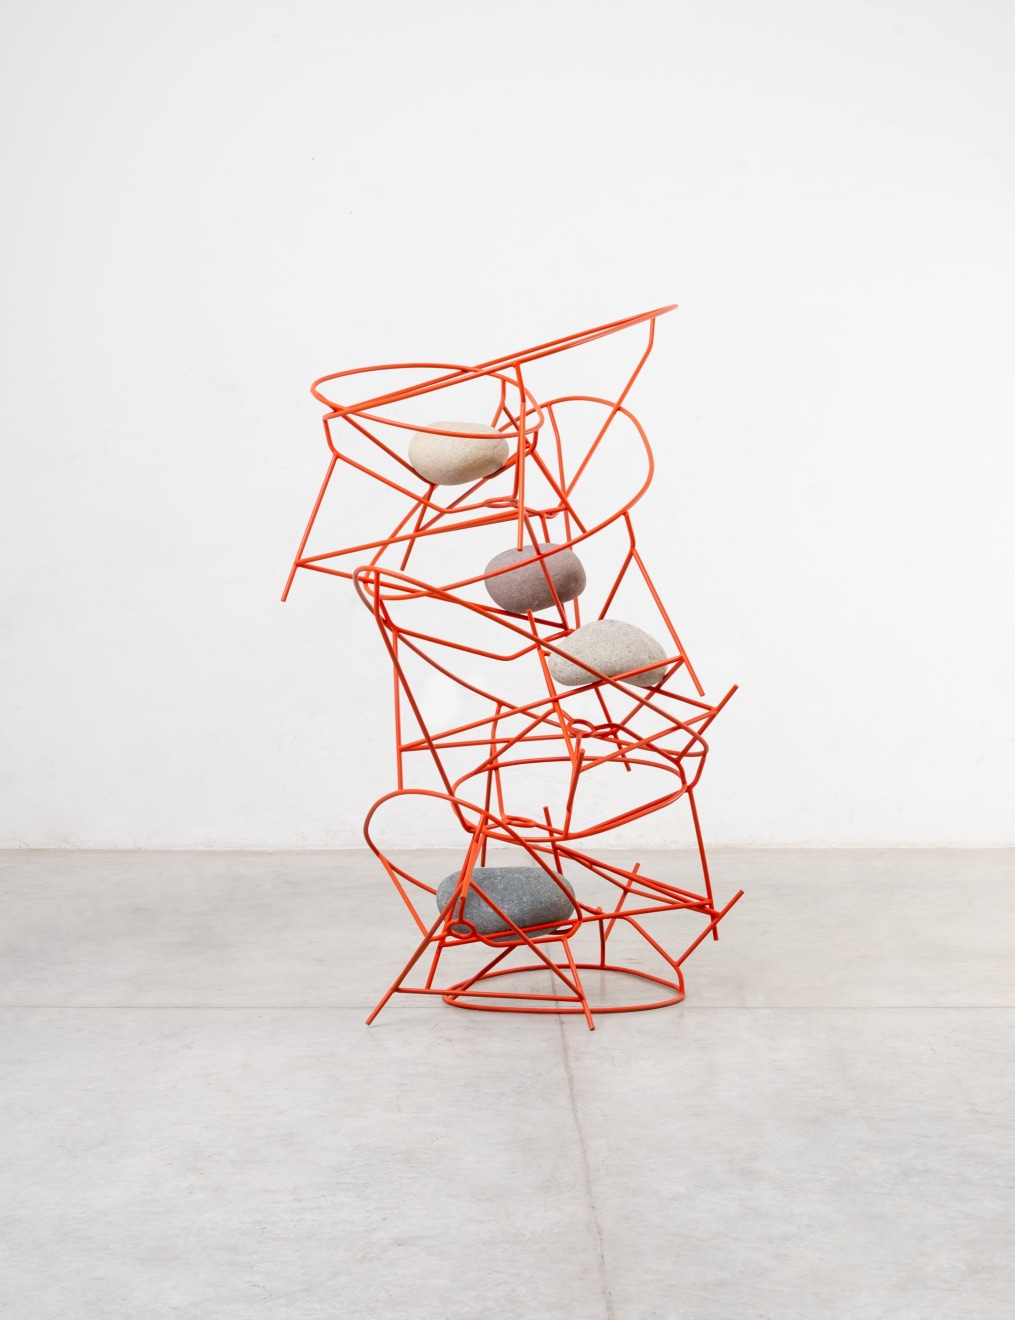 Acapulco chair stack, 2021, the work is accompanied by a signed certificate of authenticity